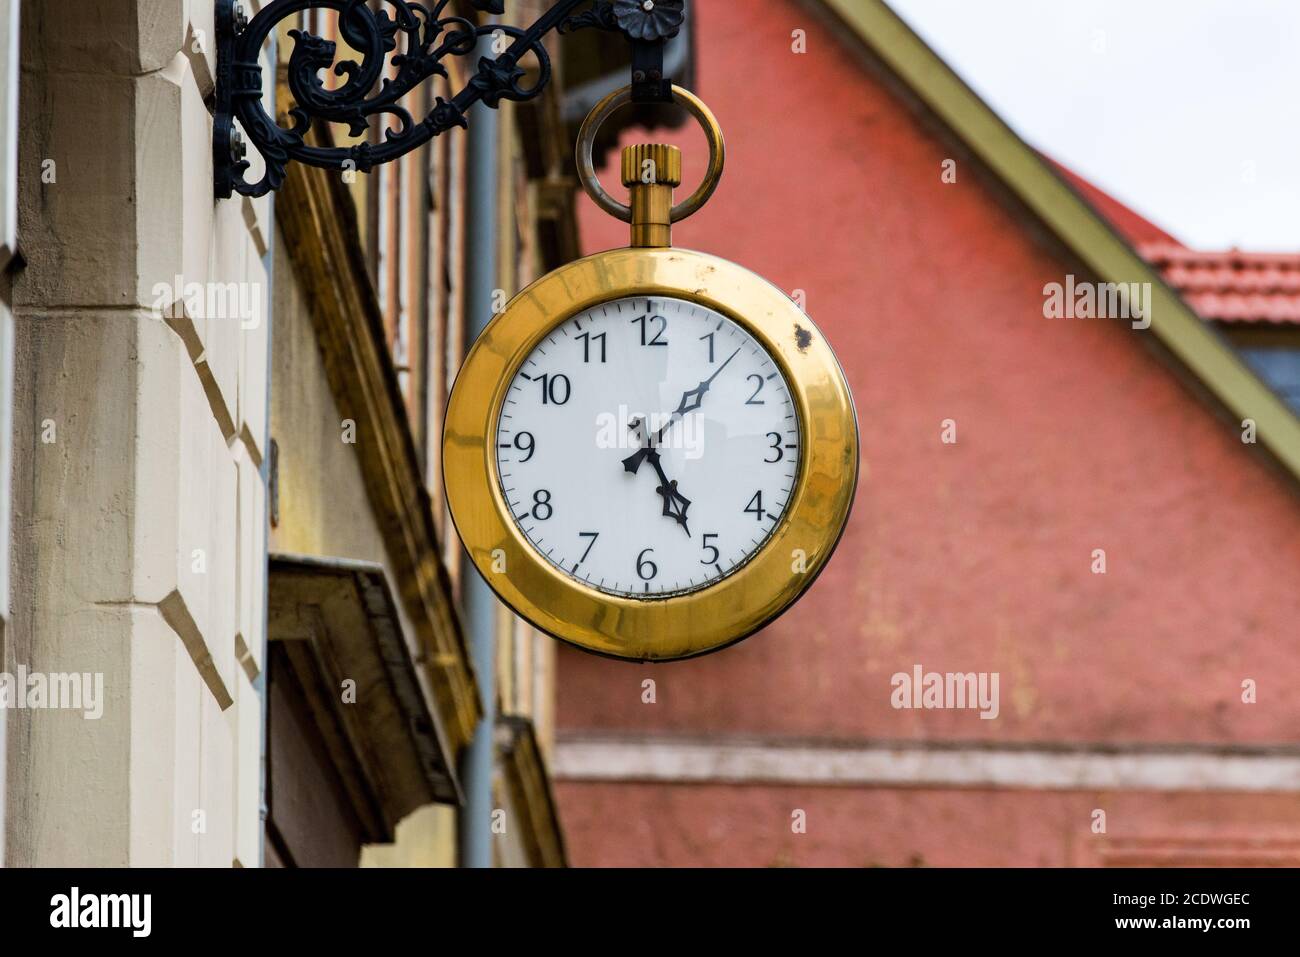 Large pocket watch as the logo of a watch shop Stock Photo